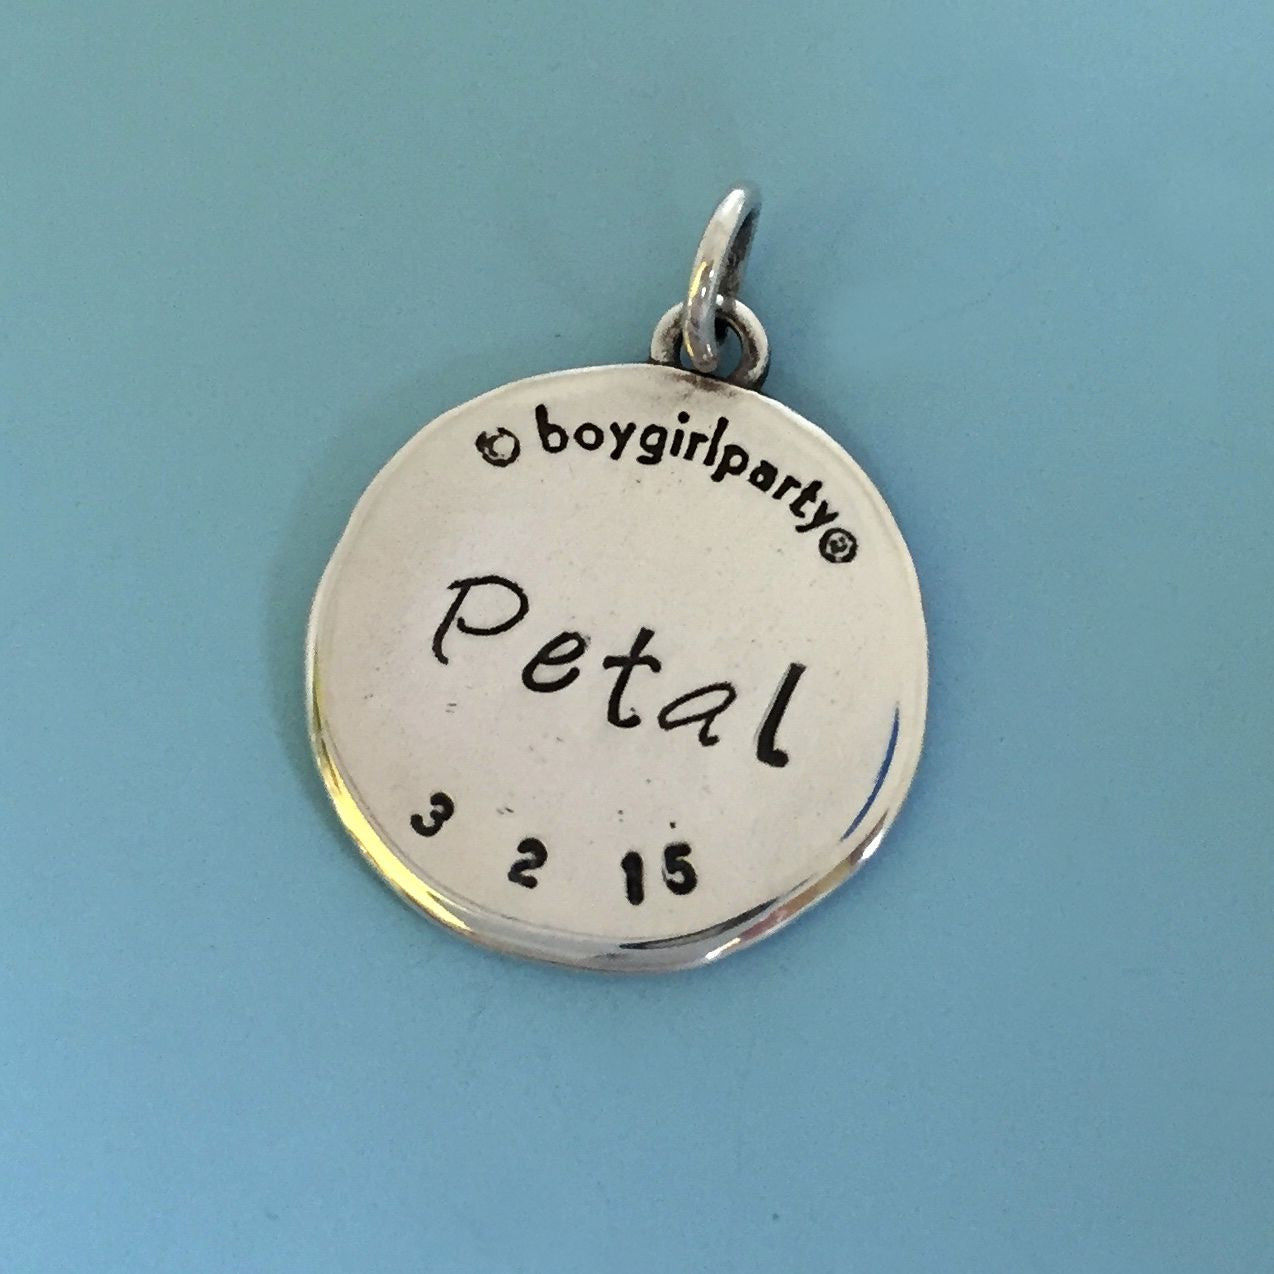 The Happy Rescued Pit Bull Necklace in Sterling Silver - Custom Stamped with Dog's Name and Date